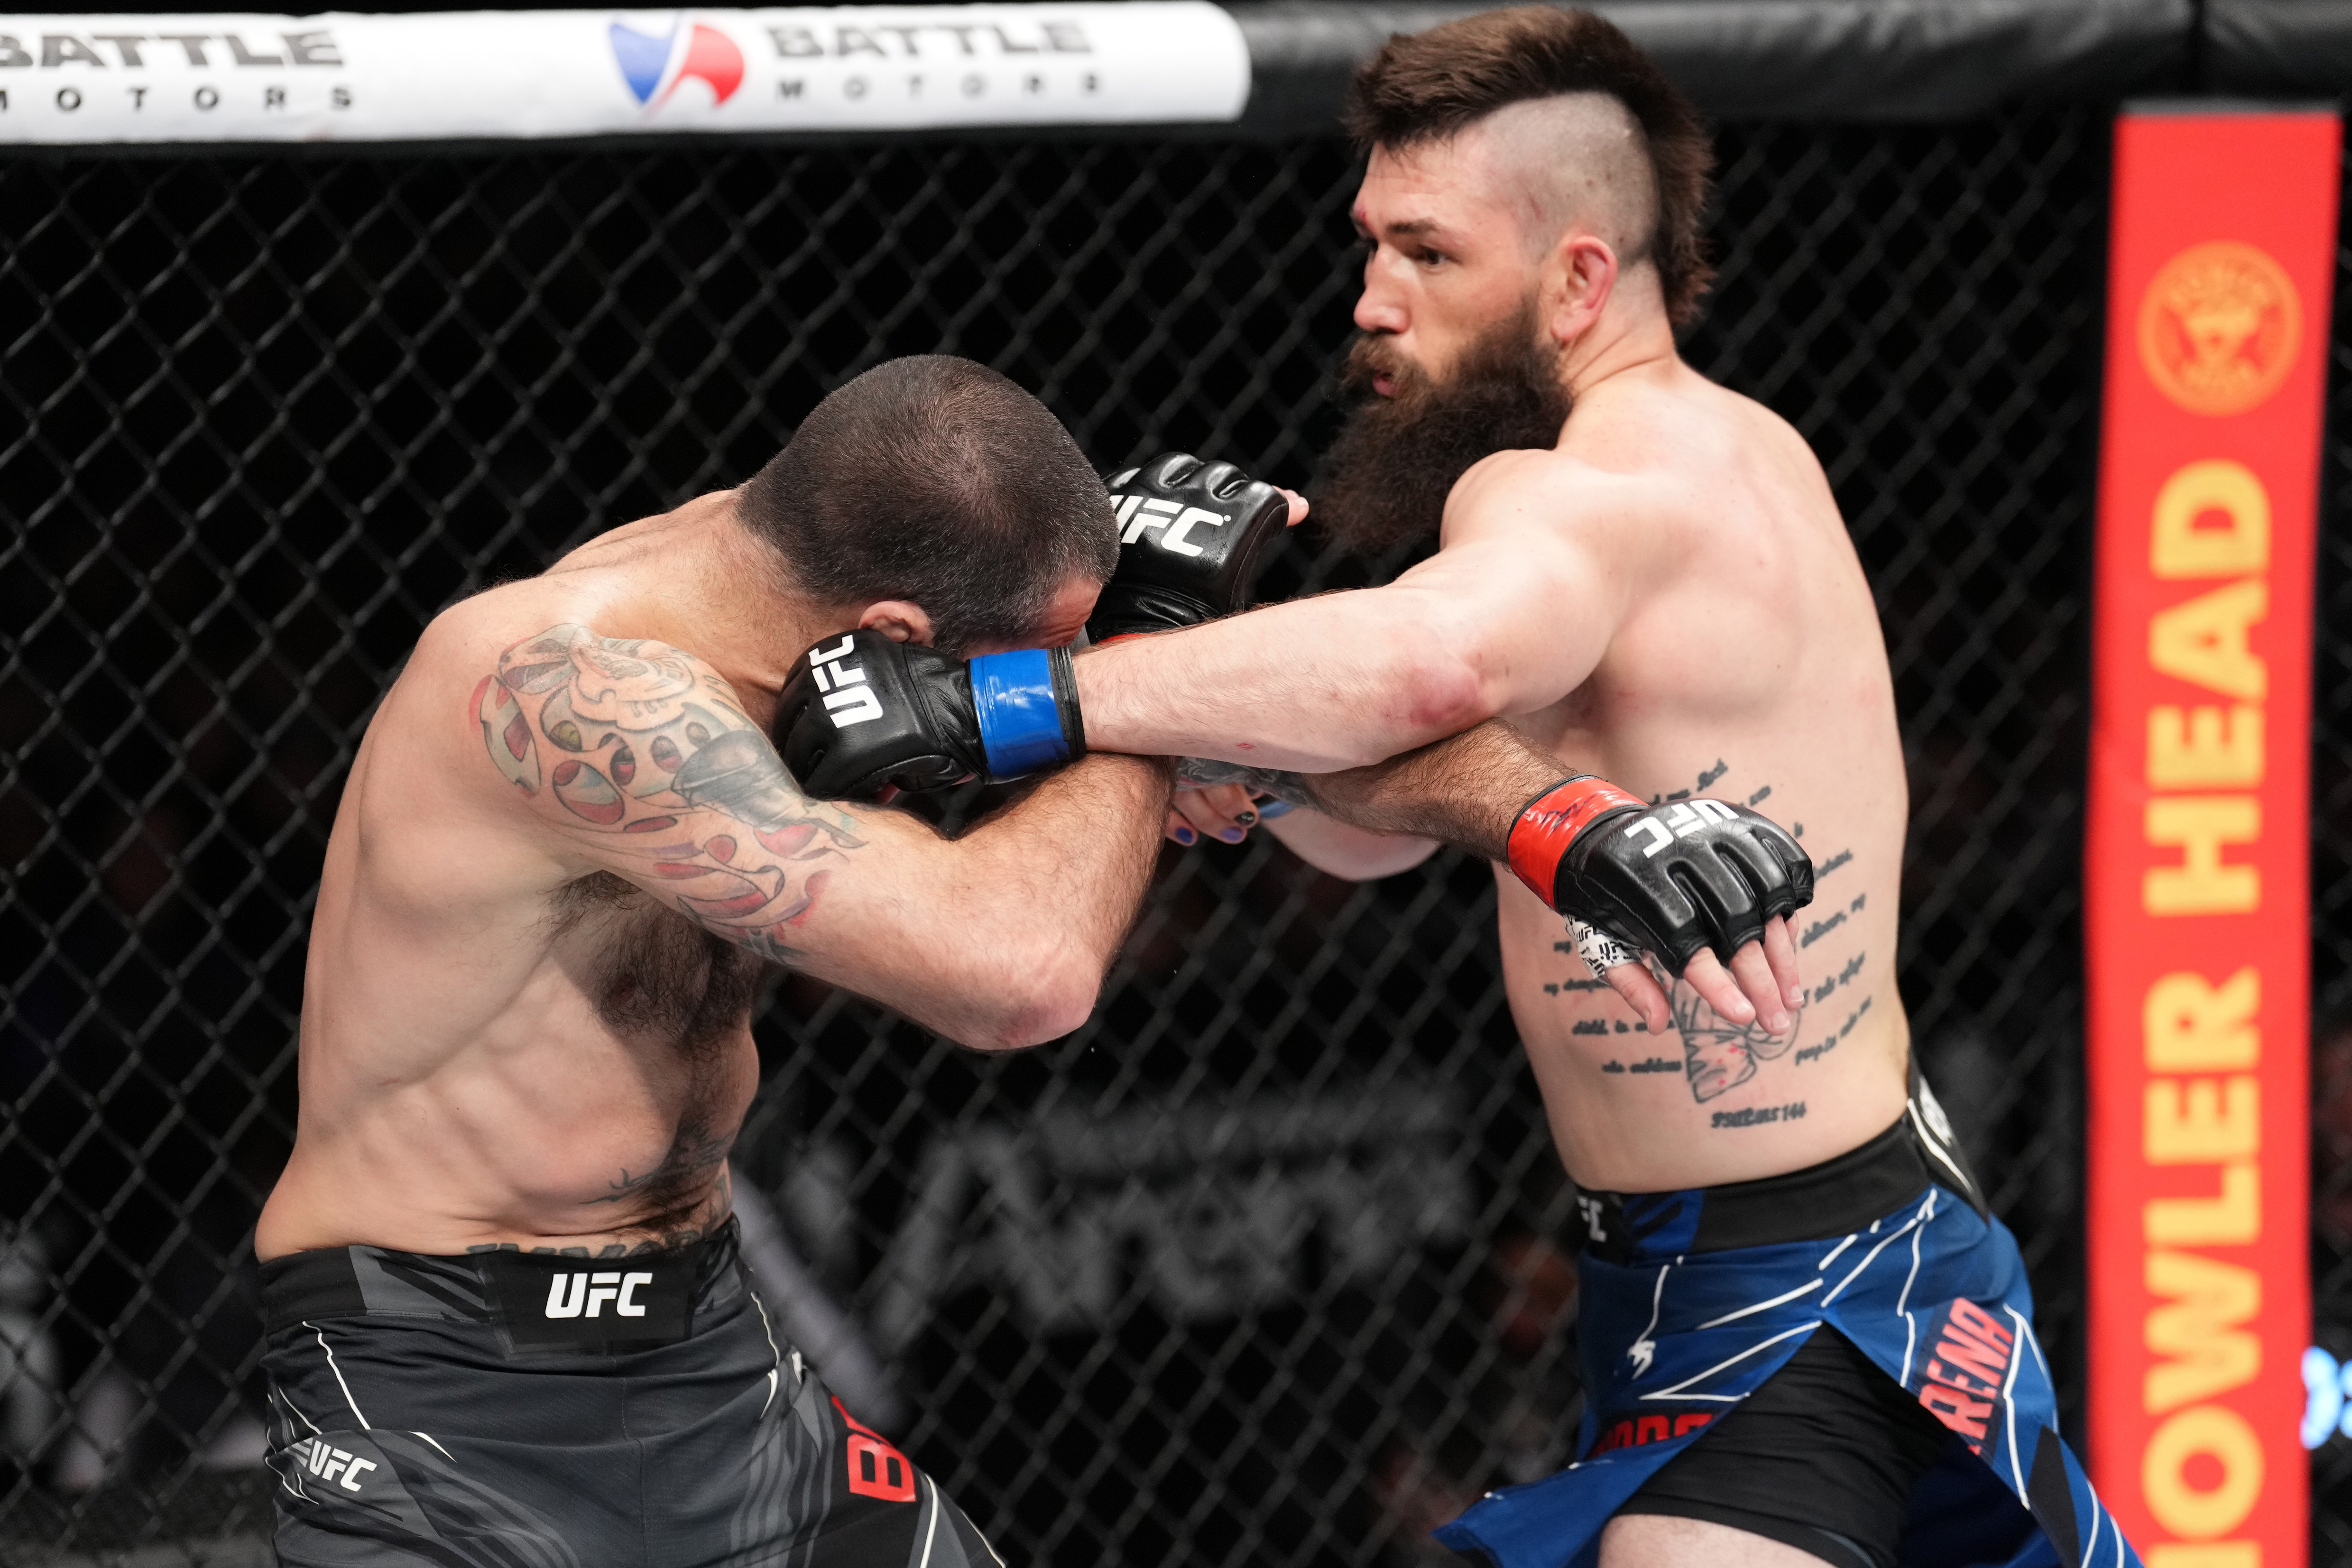 Bryan Barberena punches Matt Brown in an epic welterweight fight at UFC Columbus.